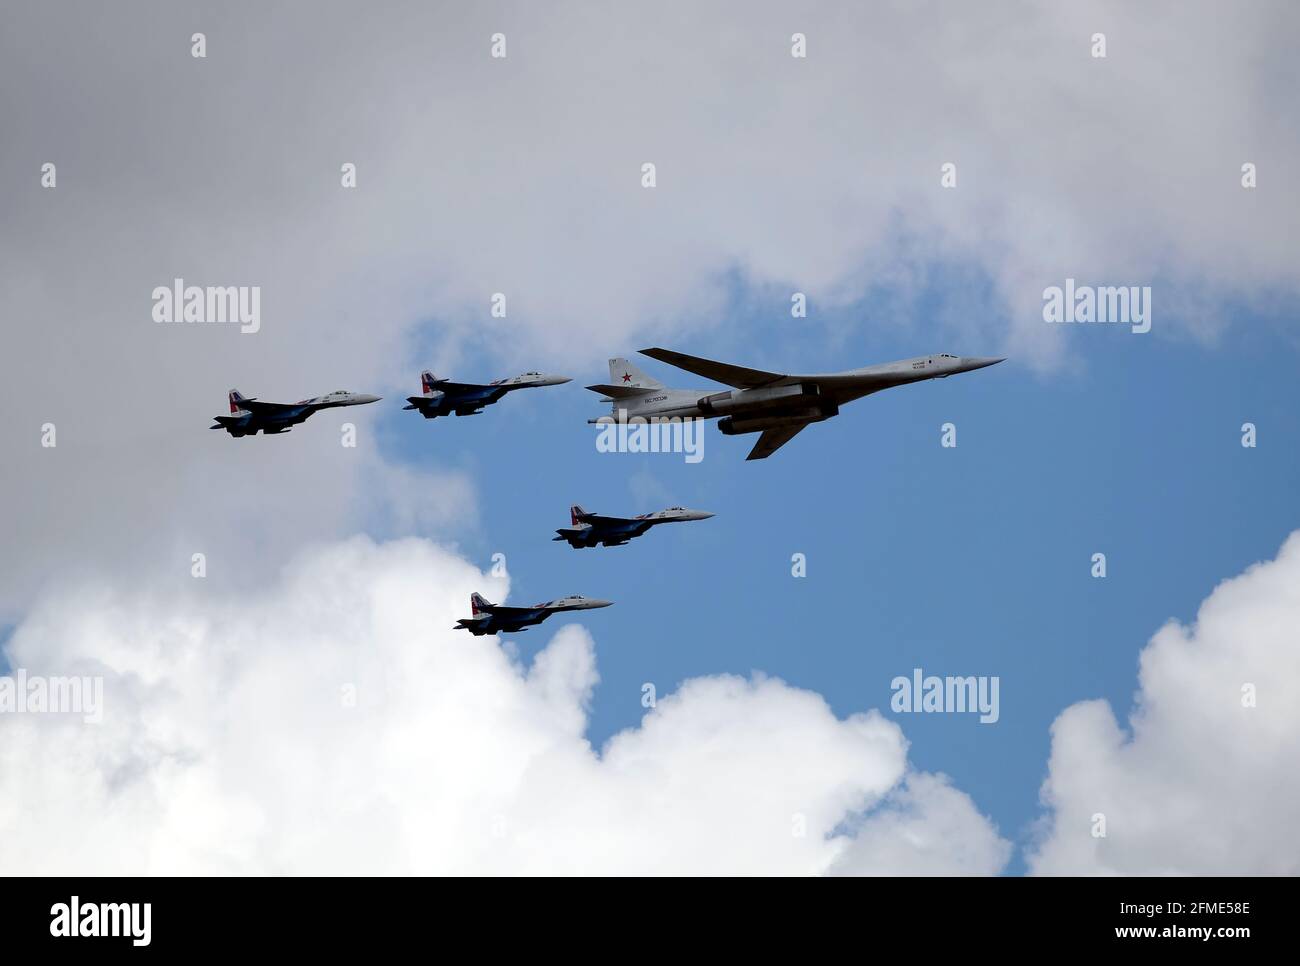 MOSCOW, RUSSIA - May 7, 2021: Russian military Supersonic bomber-missile carrier TU-160 White Swan and four SU-35S fighters following on the sides Stock Photo